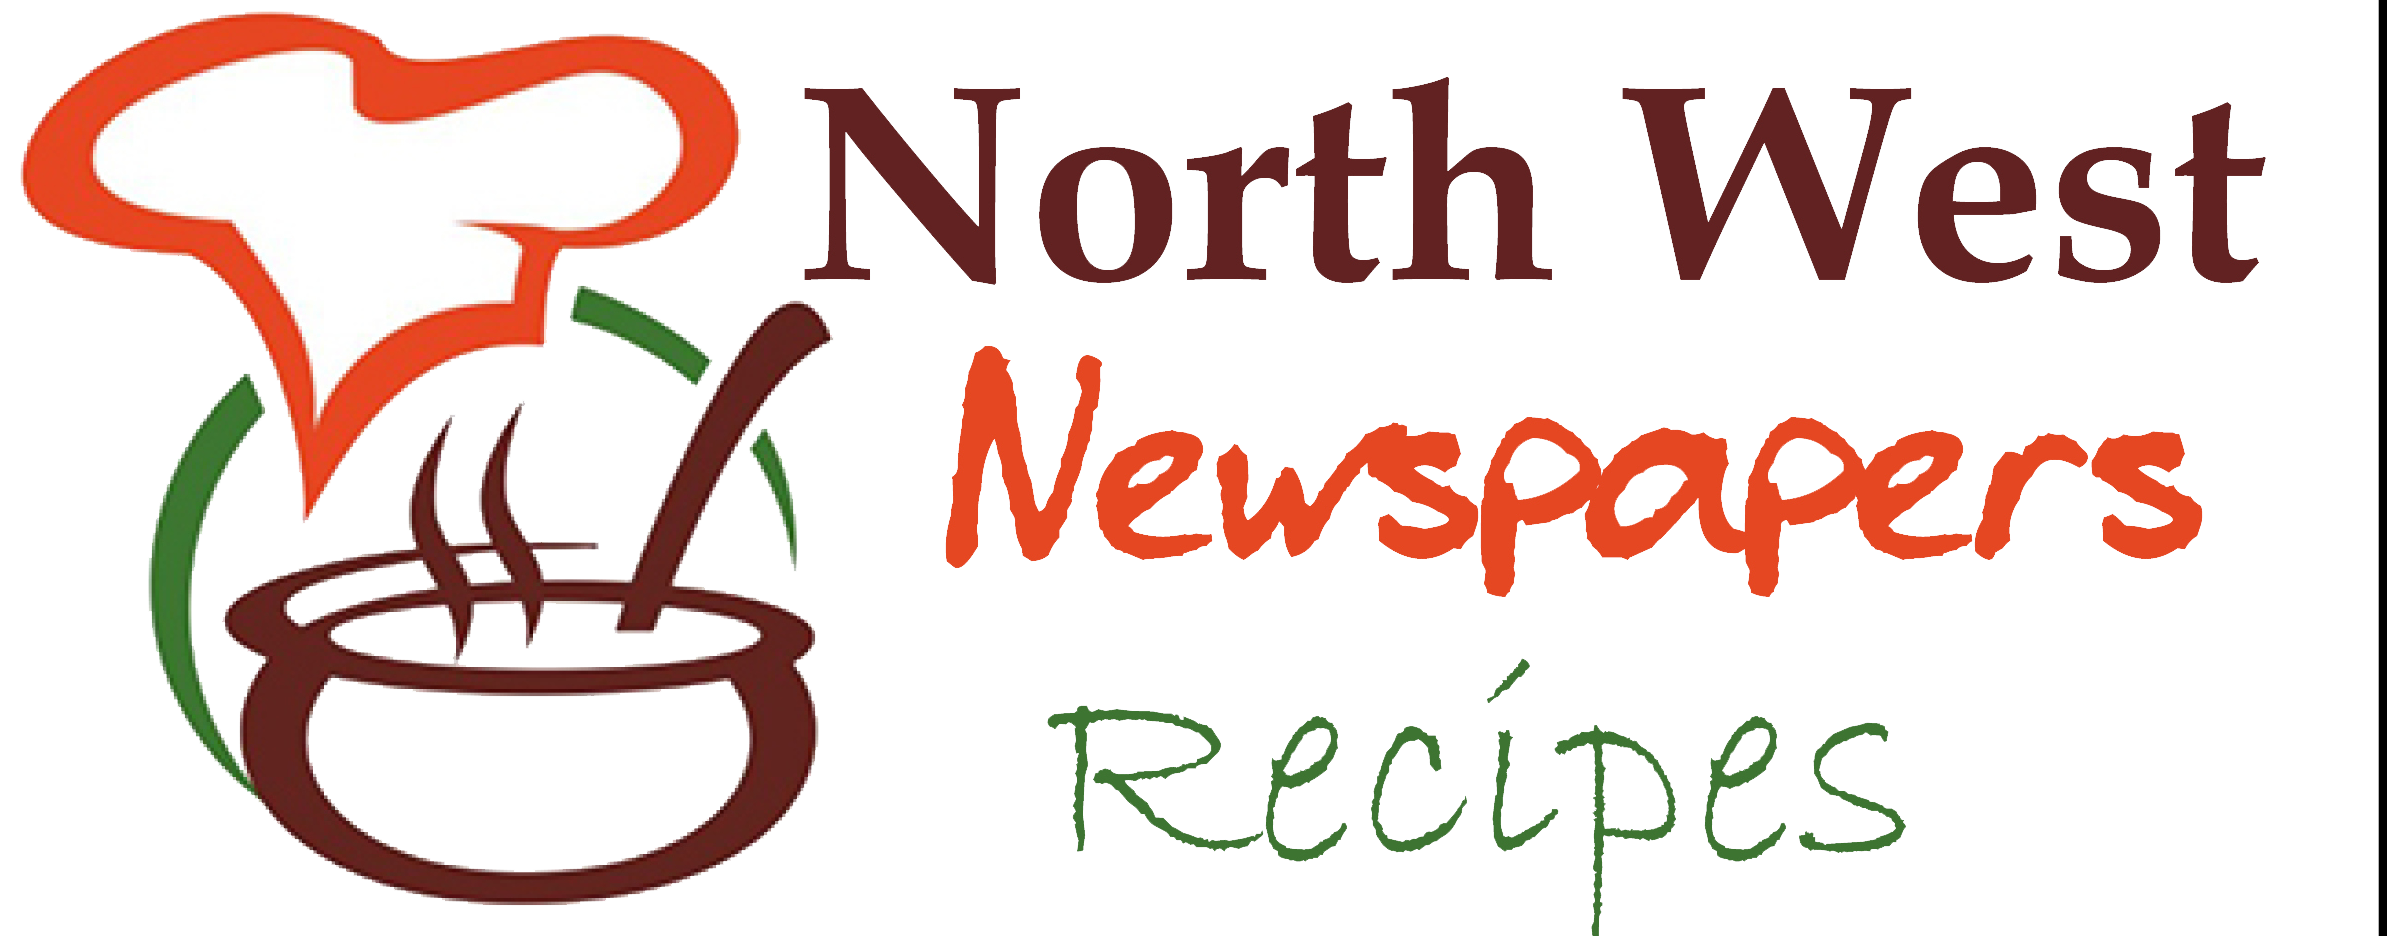 North West Newspapers Recipes